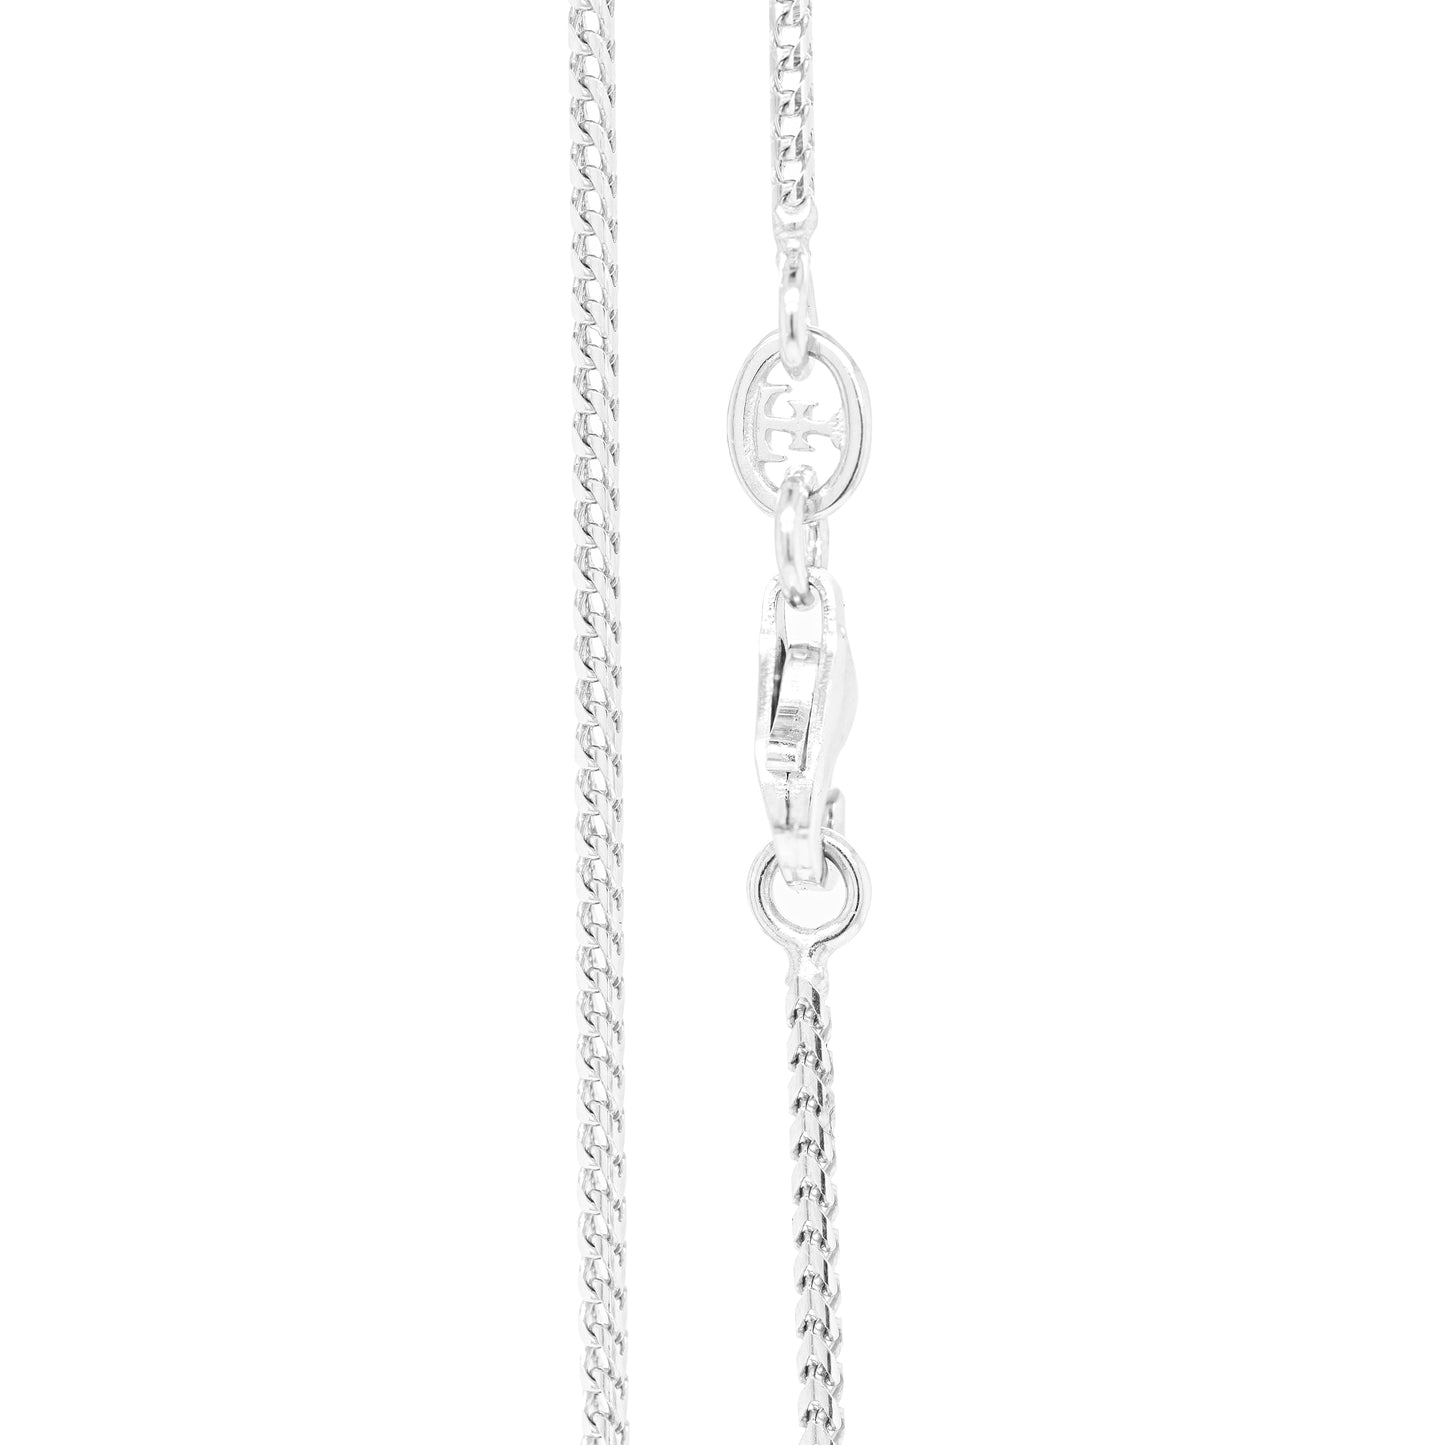 Theo Fennell 18 Carat White Gold Small Tod Cross Pendant and Chain